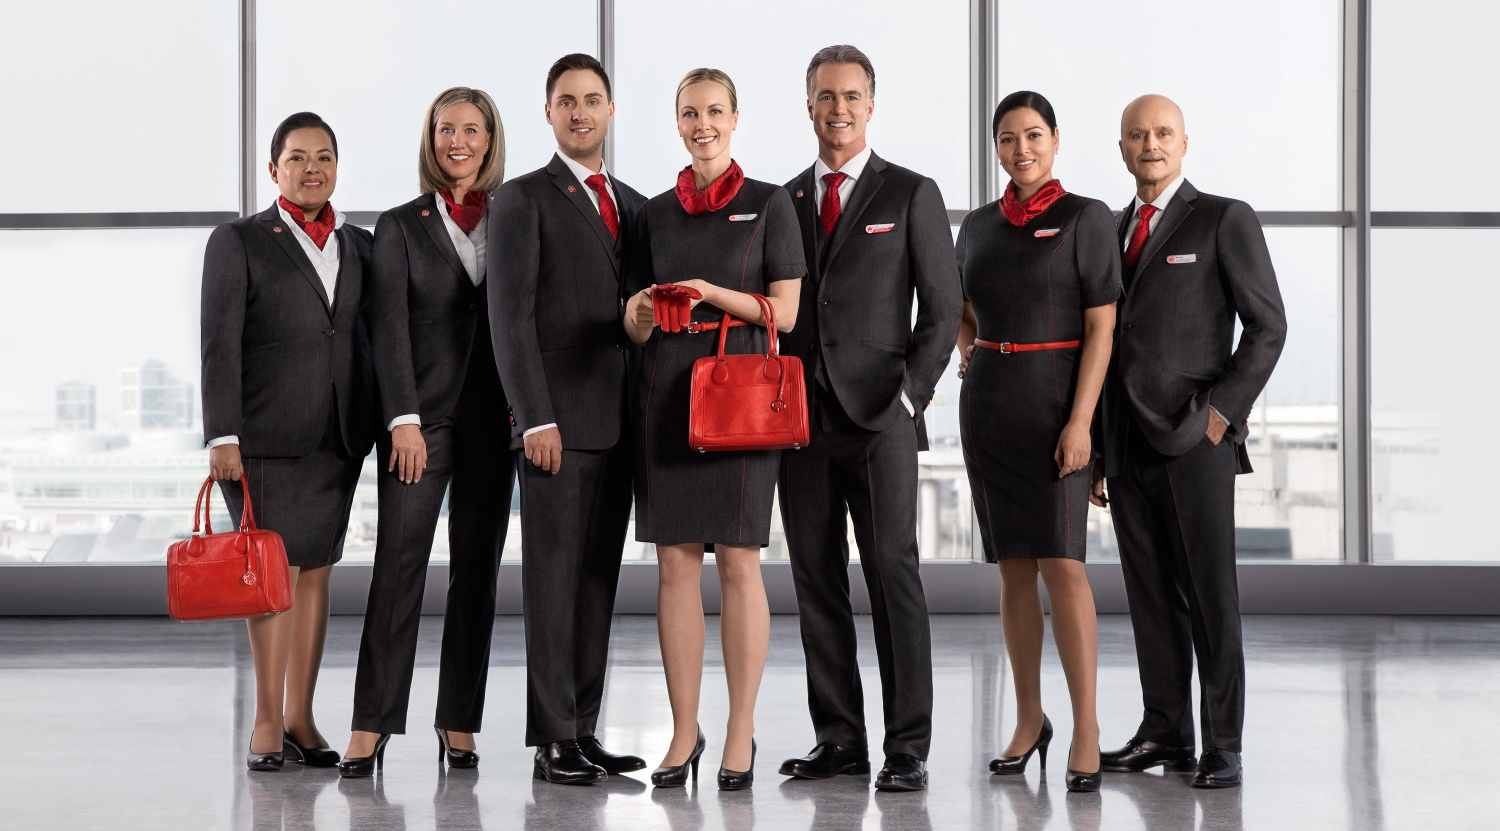 Air Canada's new charcoal grey and black employee uniforms with red accents and accessories by Canadian designer Christopher Bates